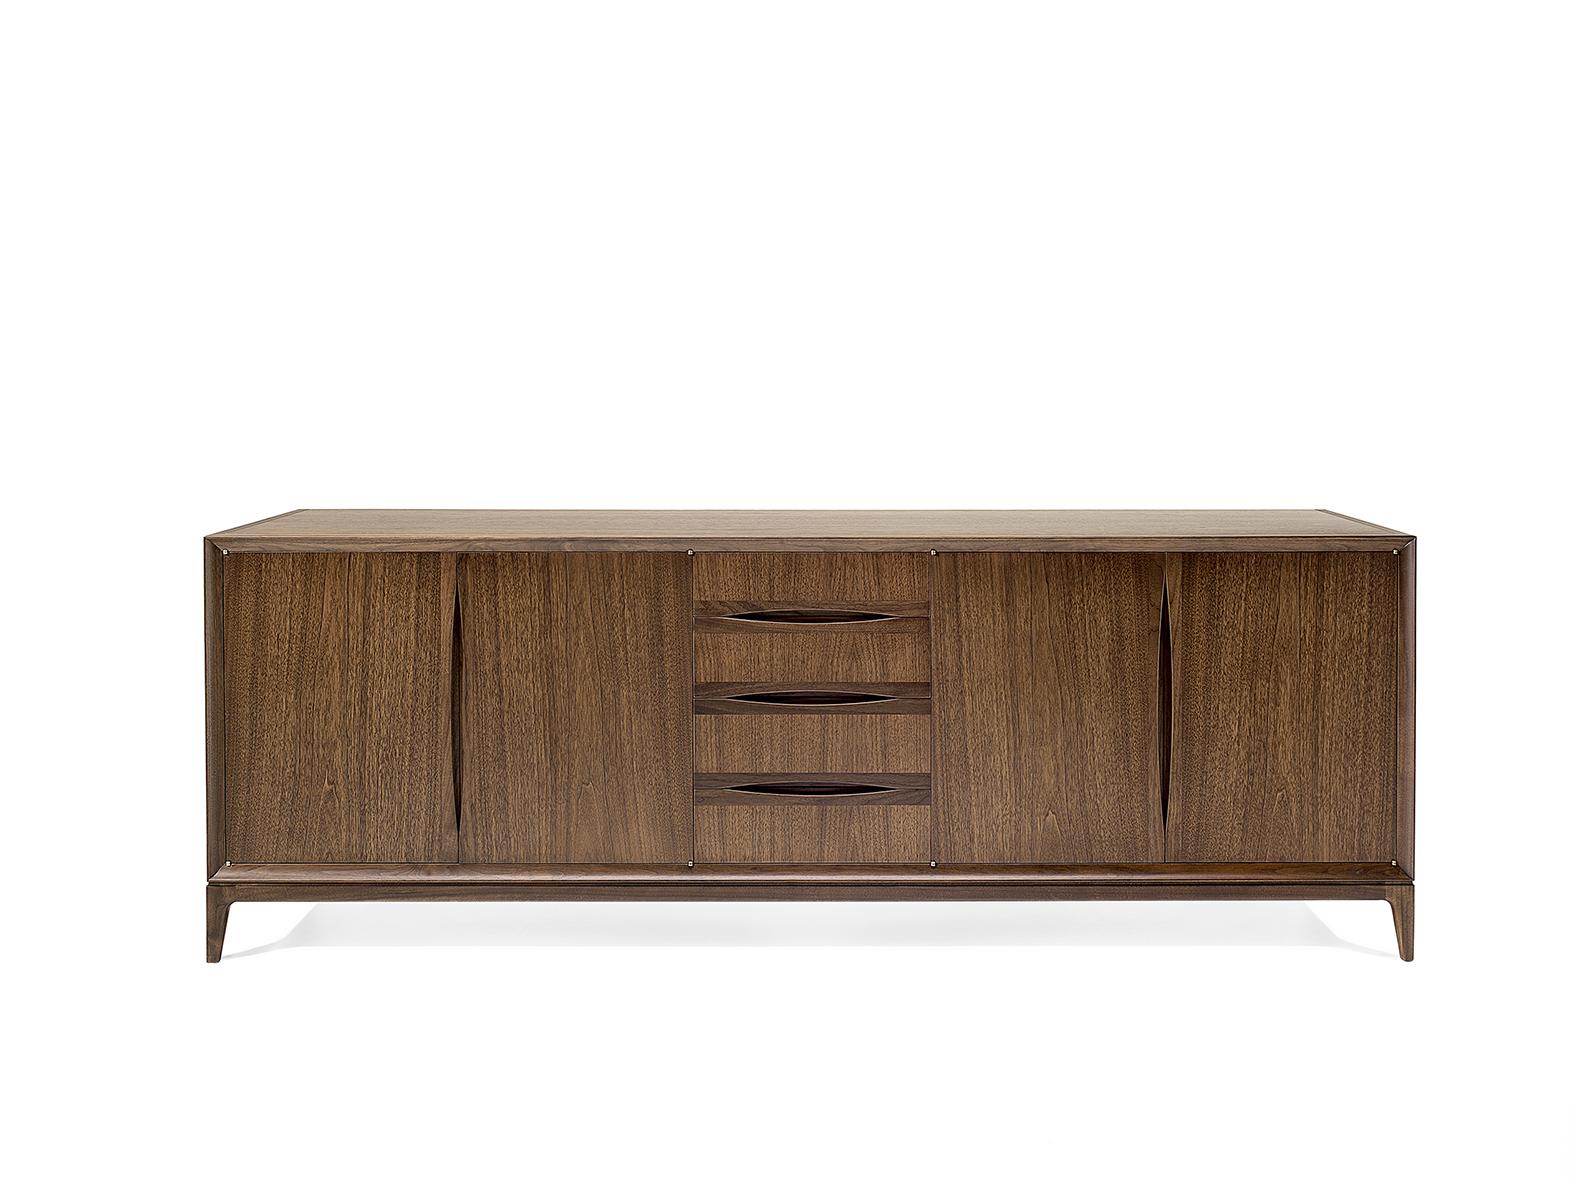 Designed by CC Studio in 2012 for Ceccotti. This elegant credenza is in a Dark American Walnut. Its almost monolithic architecture is lightened by its slender legs. Brad offers plenty of storage space: as well as the four doors fitted with inside